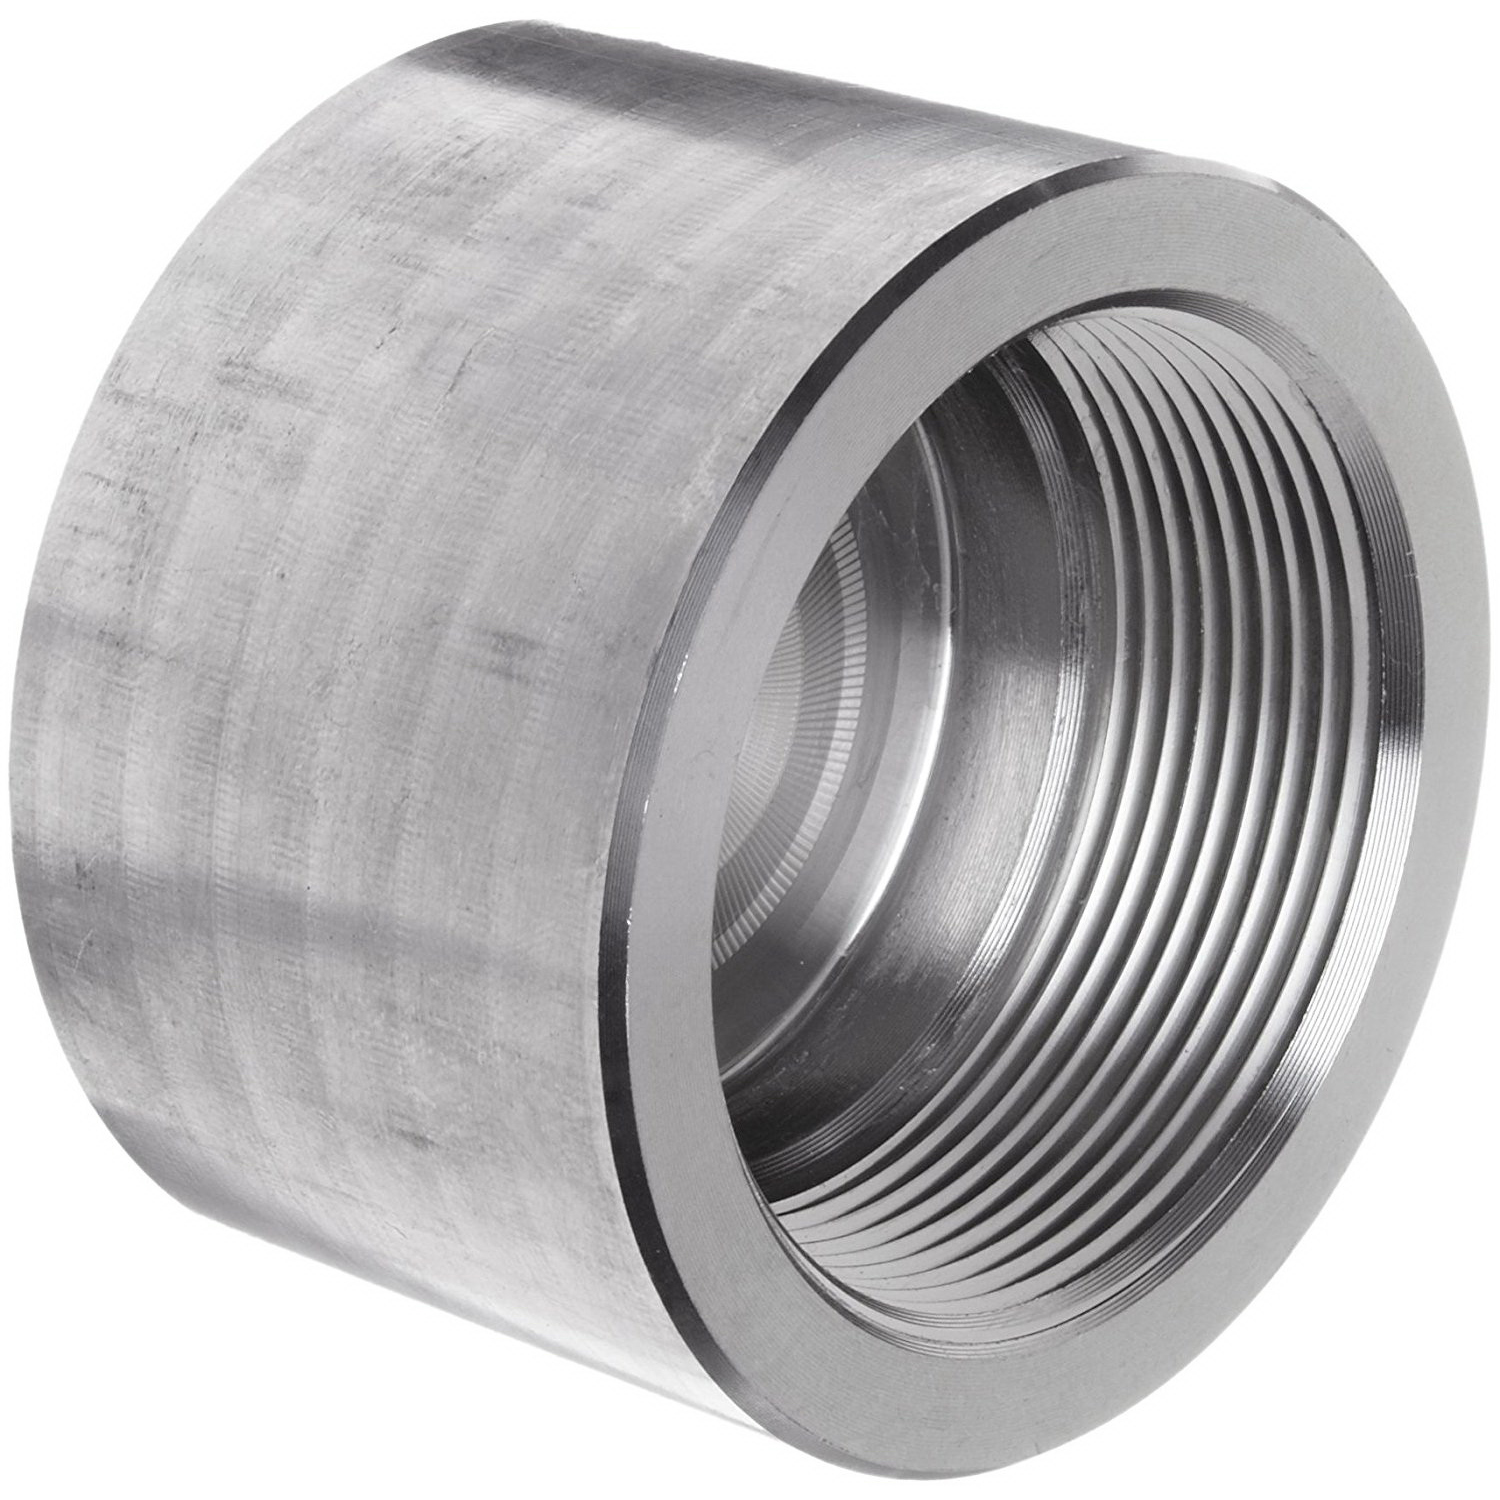 304 Stainless Steel Class 150 Cap, Threaded, Domestic